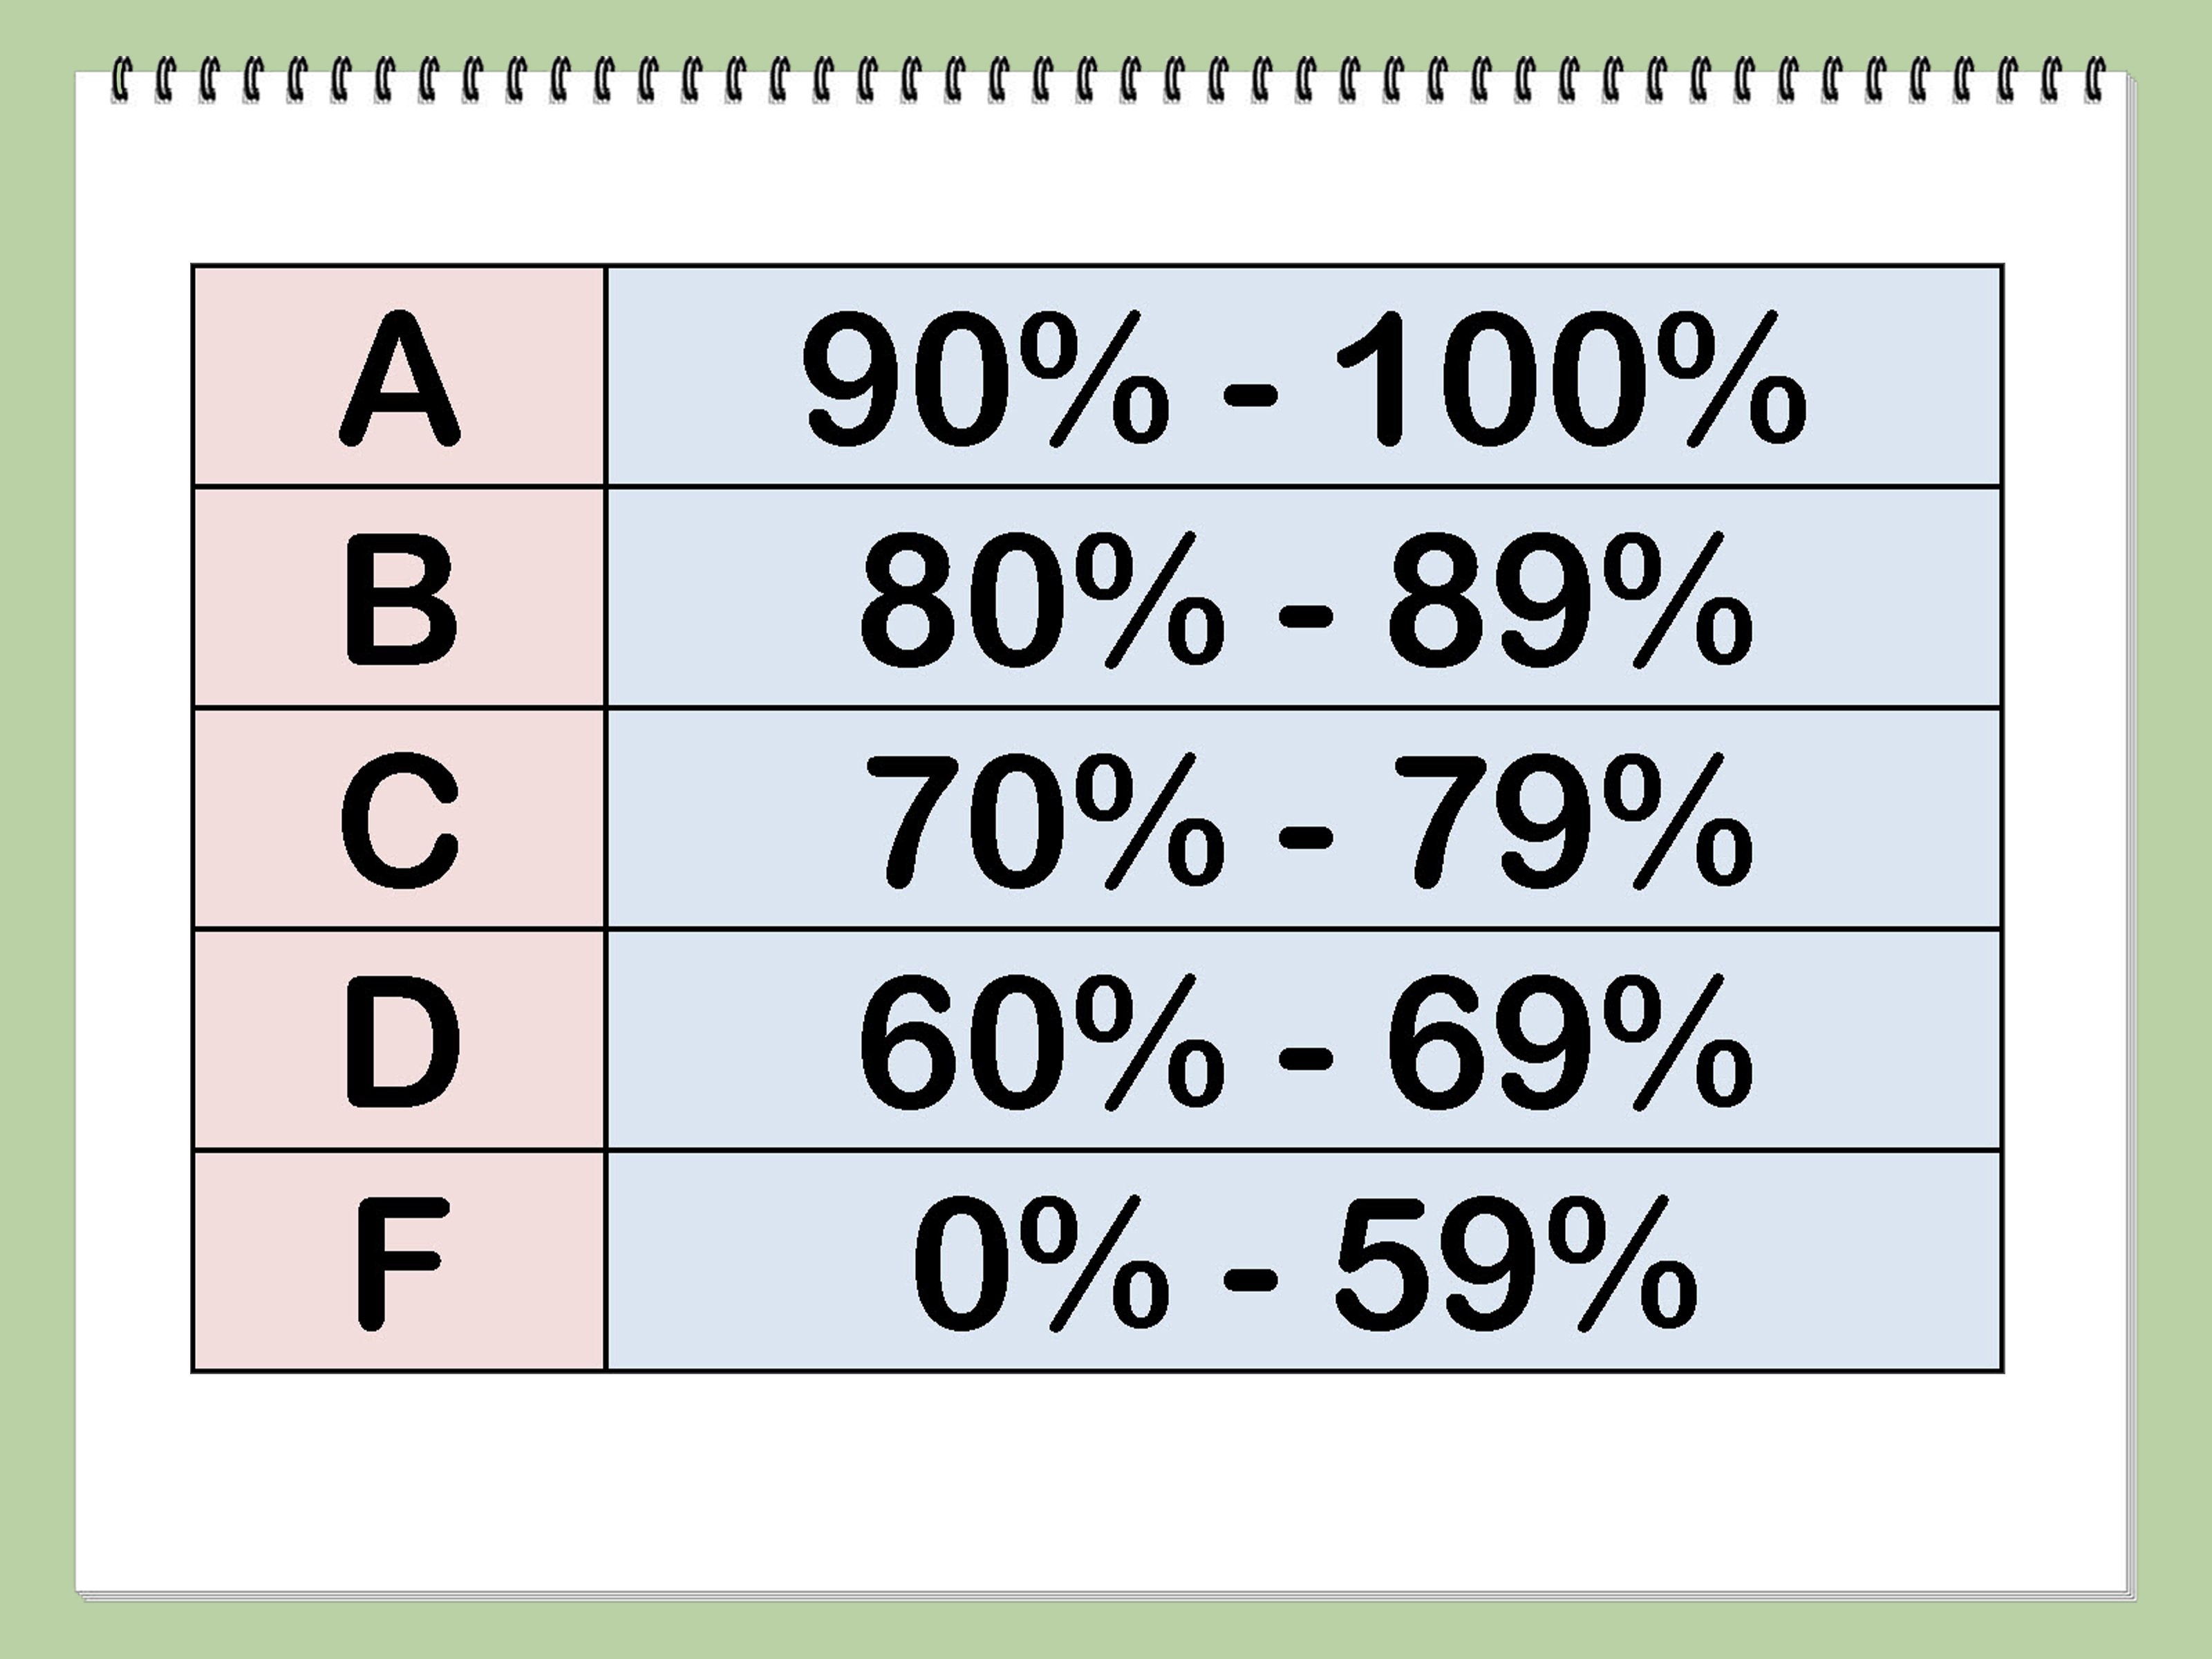 letter grades and percentages pitzer collegfe